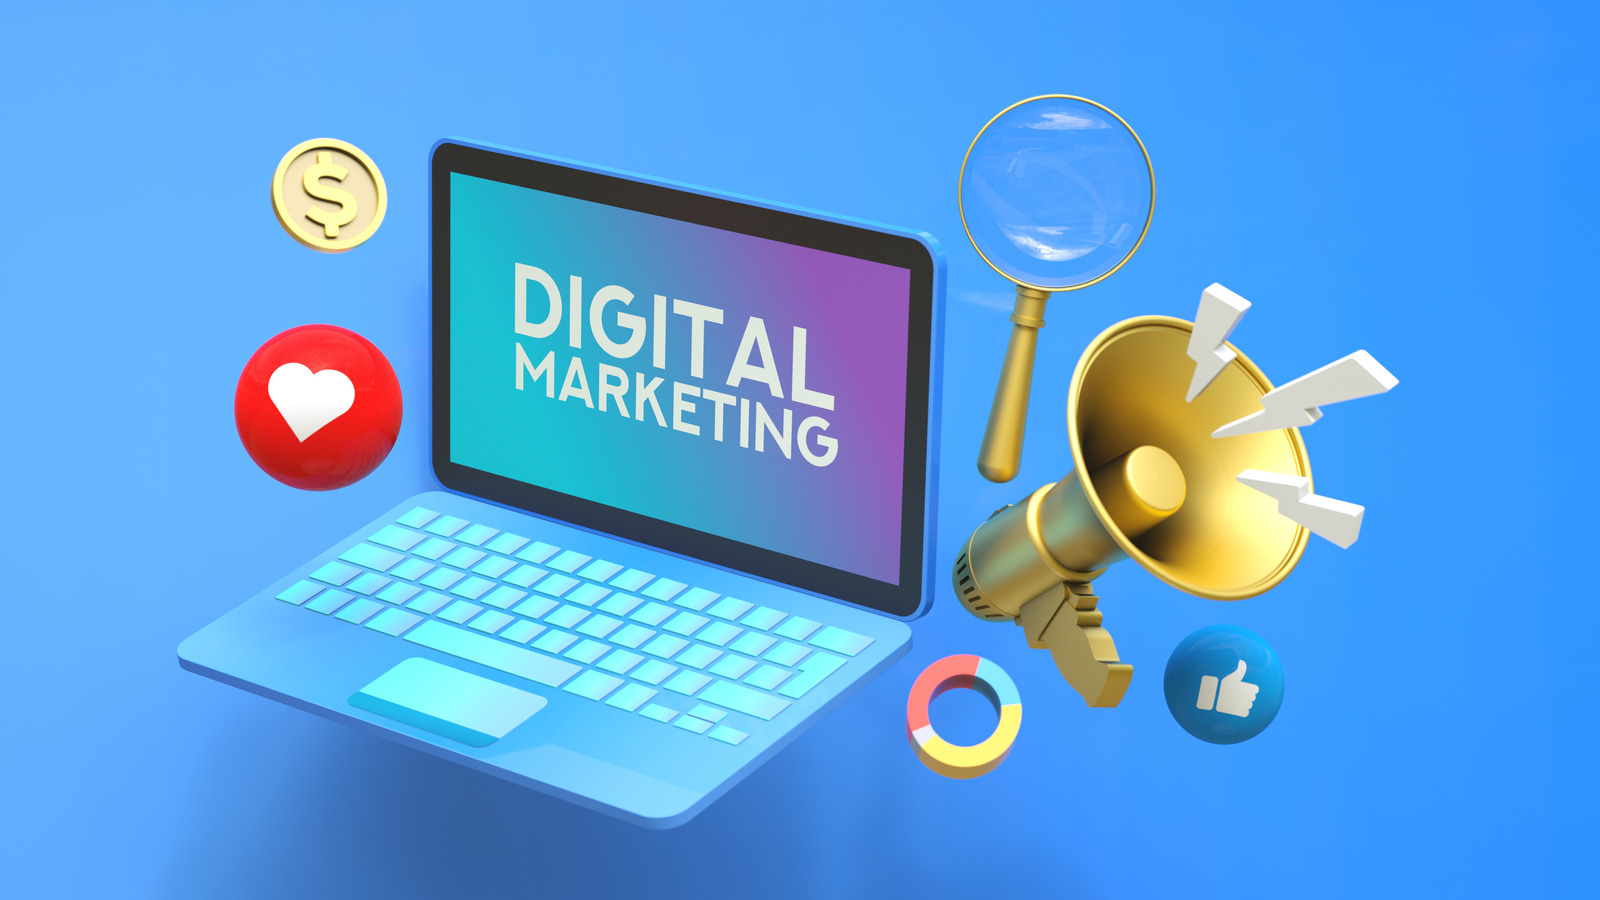 What Is Digital Marketing For A Financial Services Summit?